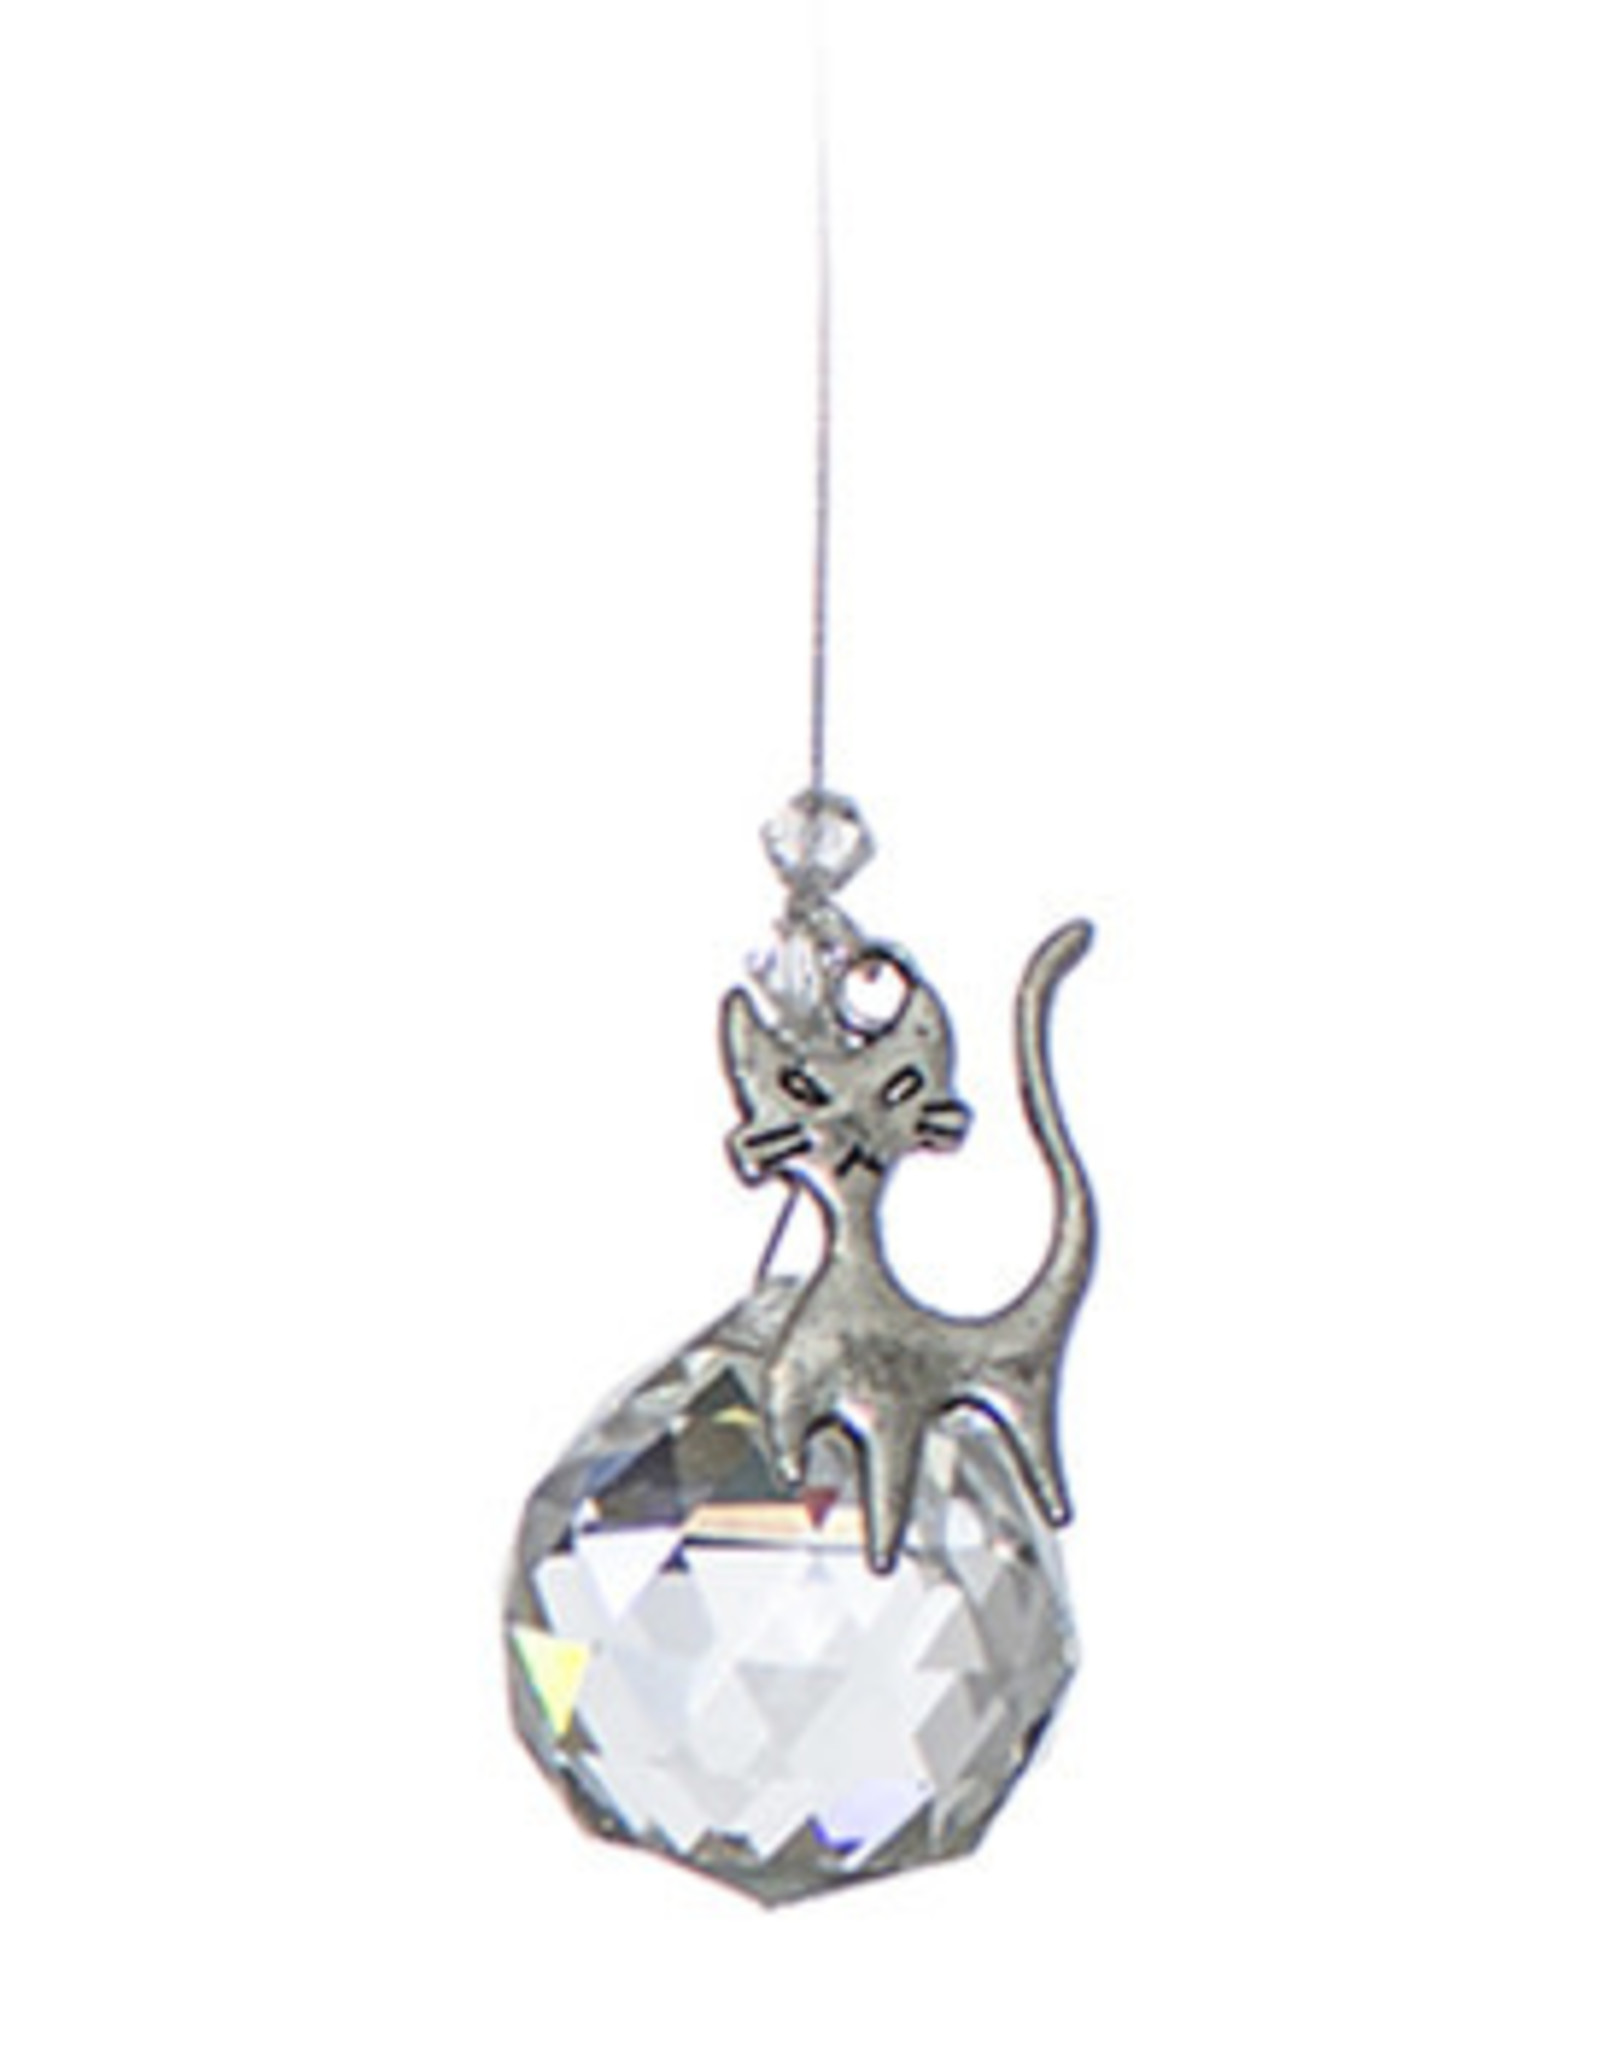 Off The Wall Creations Crystal Art - Chakra Cat